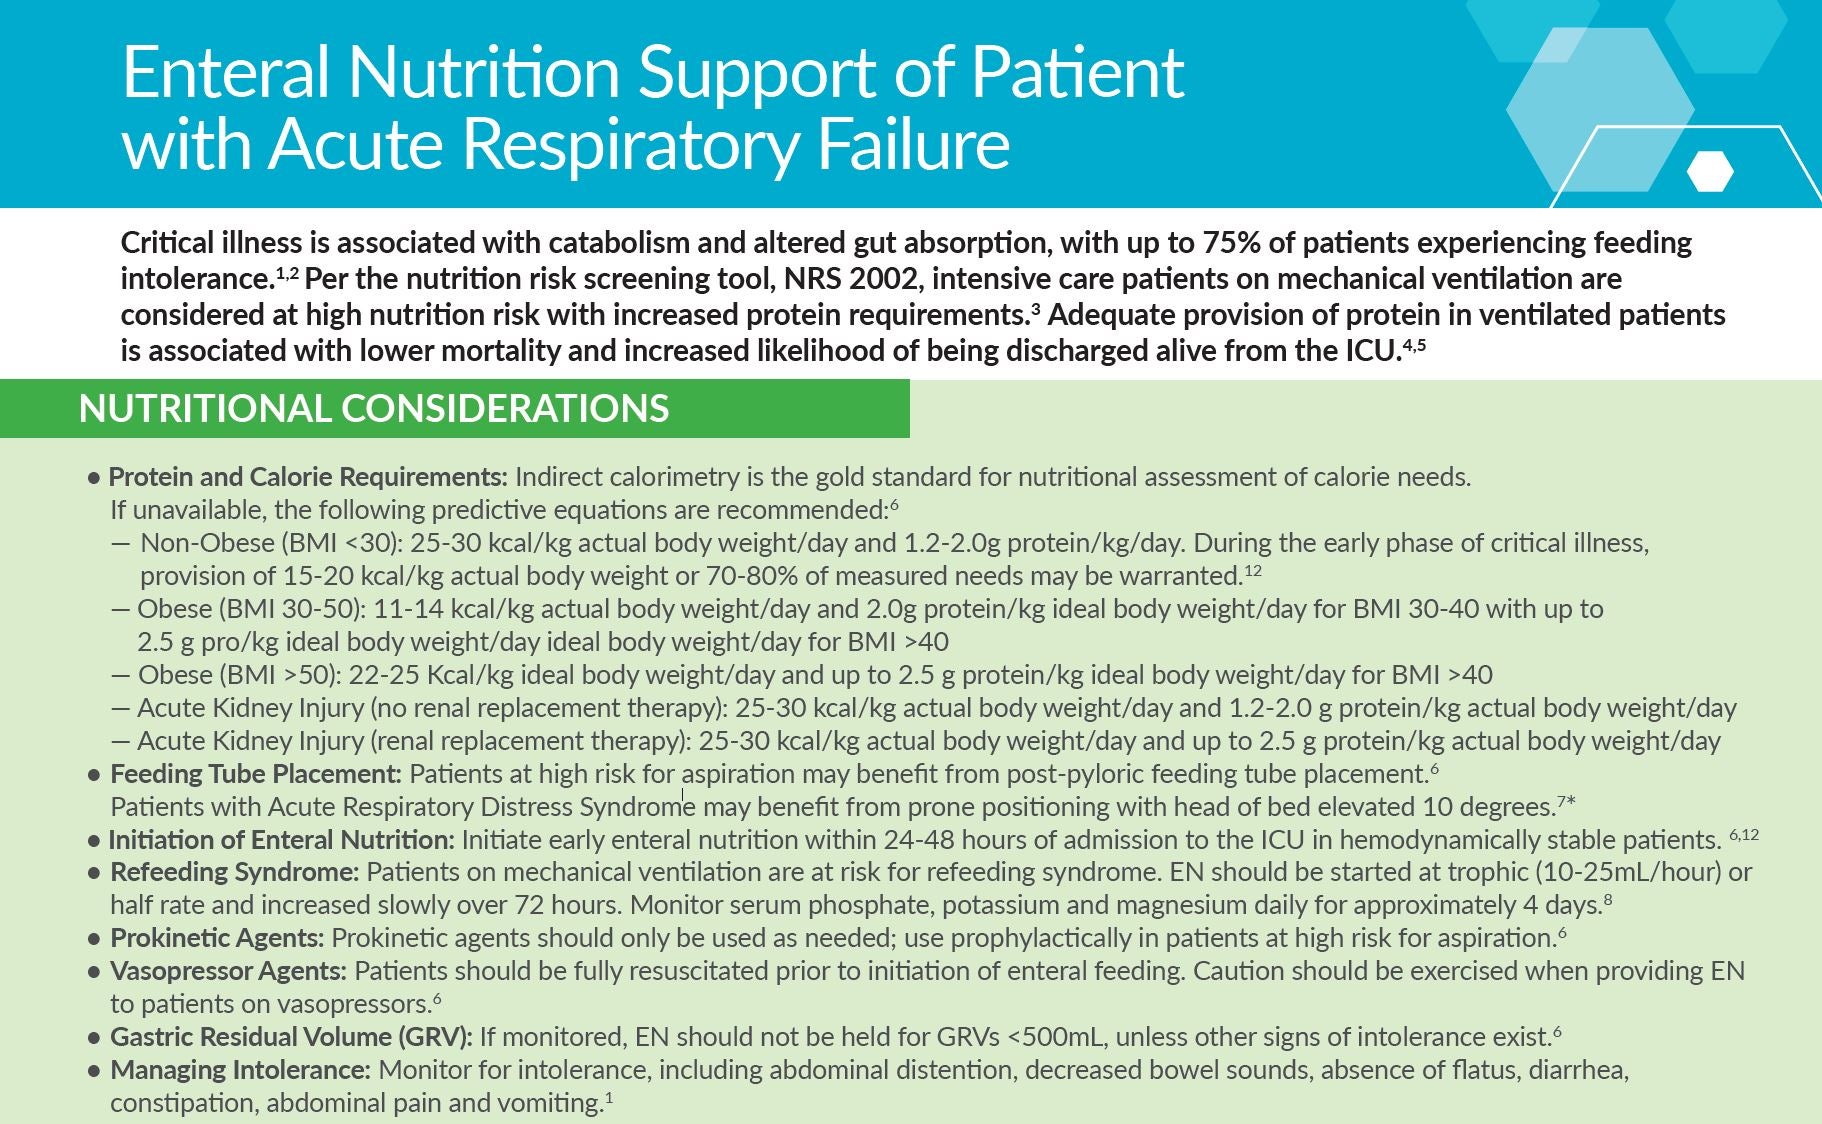 Enteral Nutrition Support of Patient with Acute Respiratory Failure